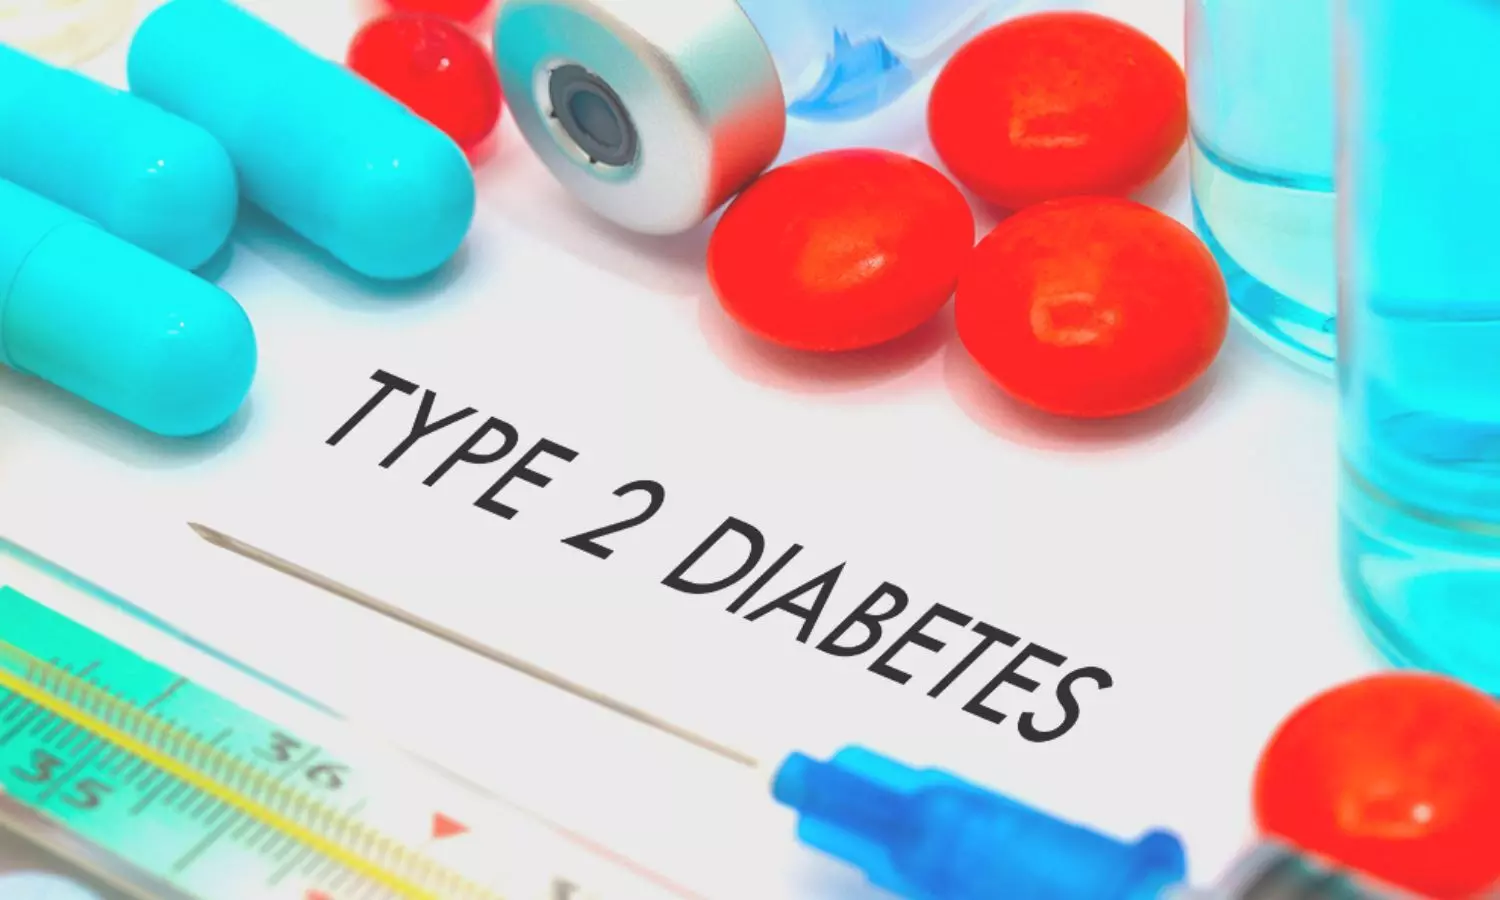 Acarbose best suited for newly diagnosed type 2 diabetes patients with obesity